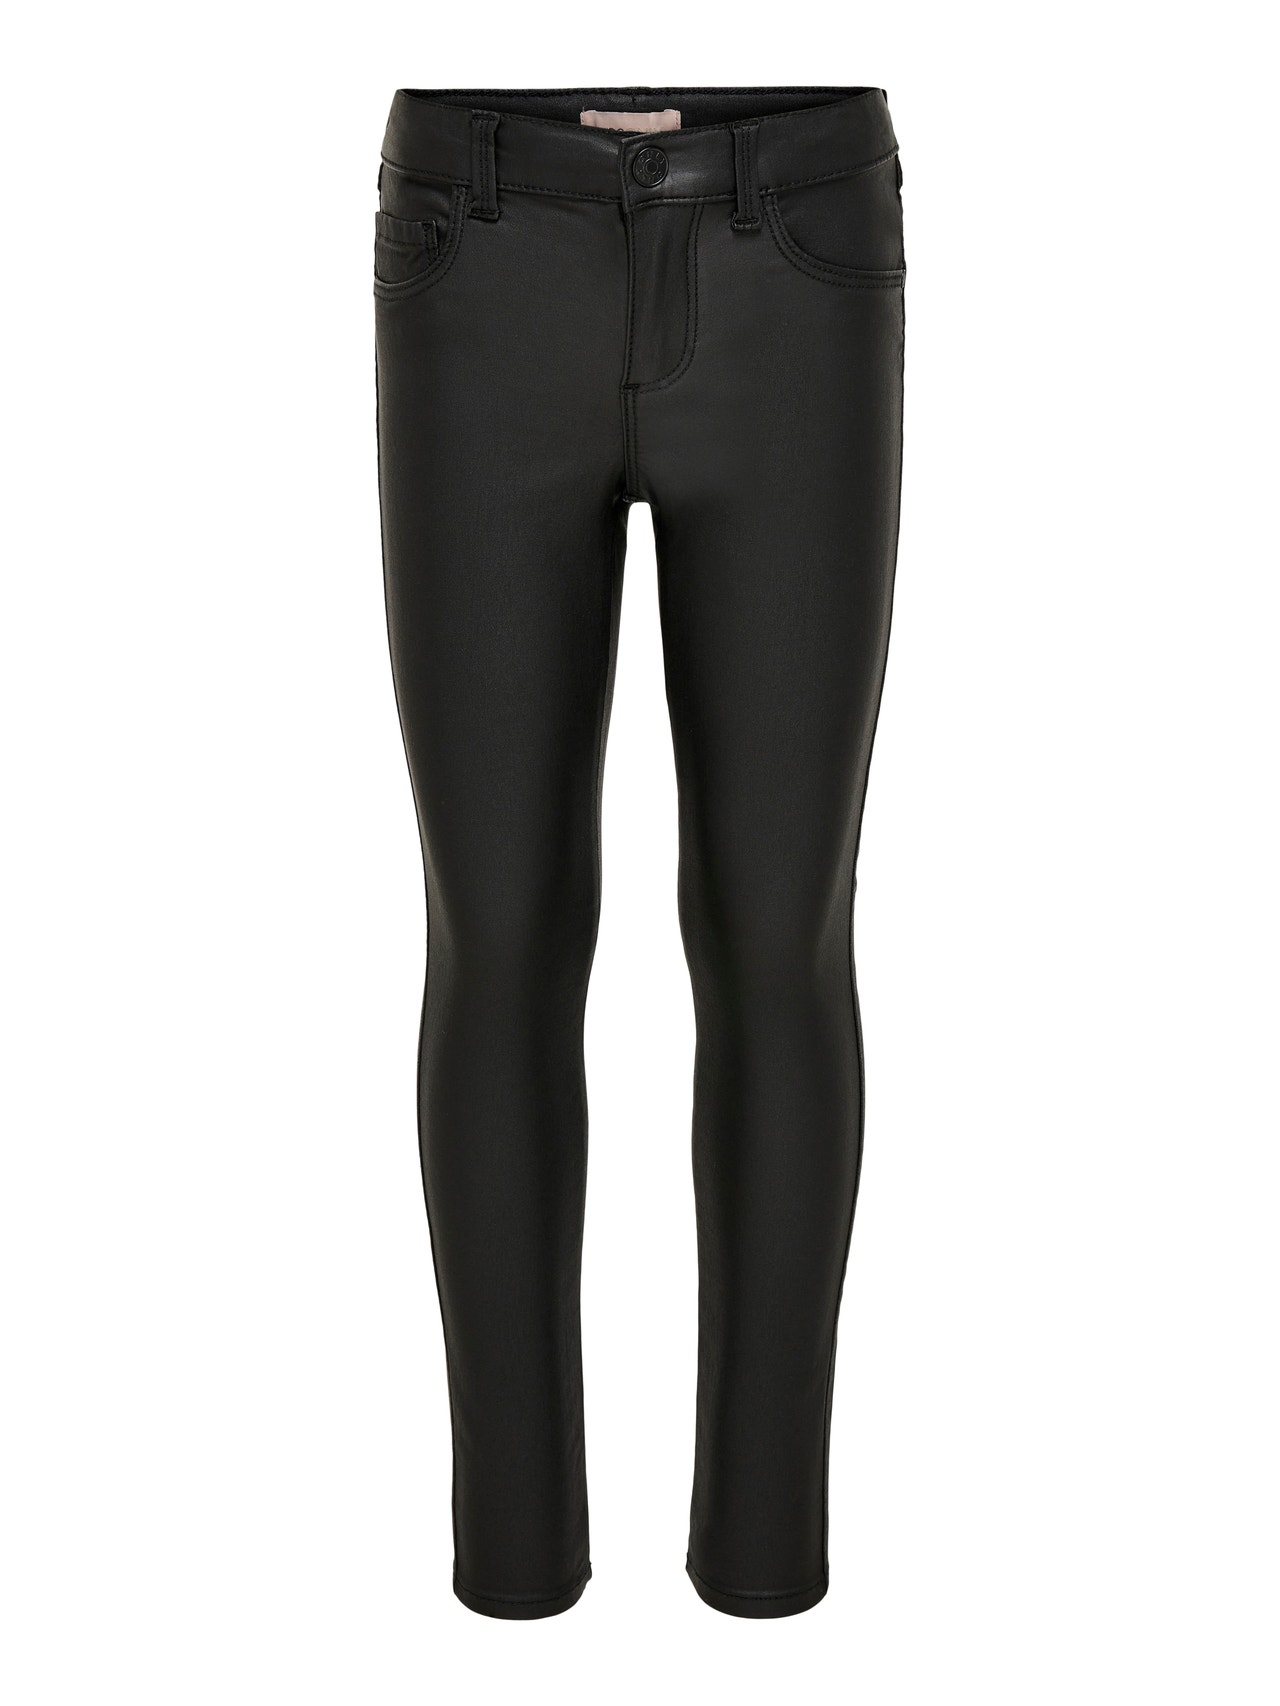 ONLY Skinny Fit Regular waist Trousers -Black - 15210750